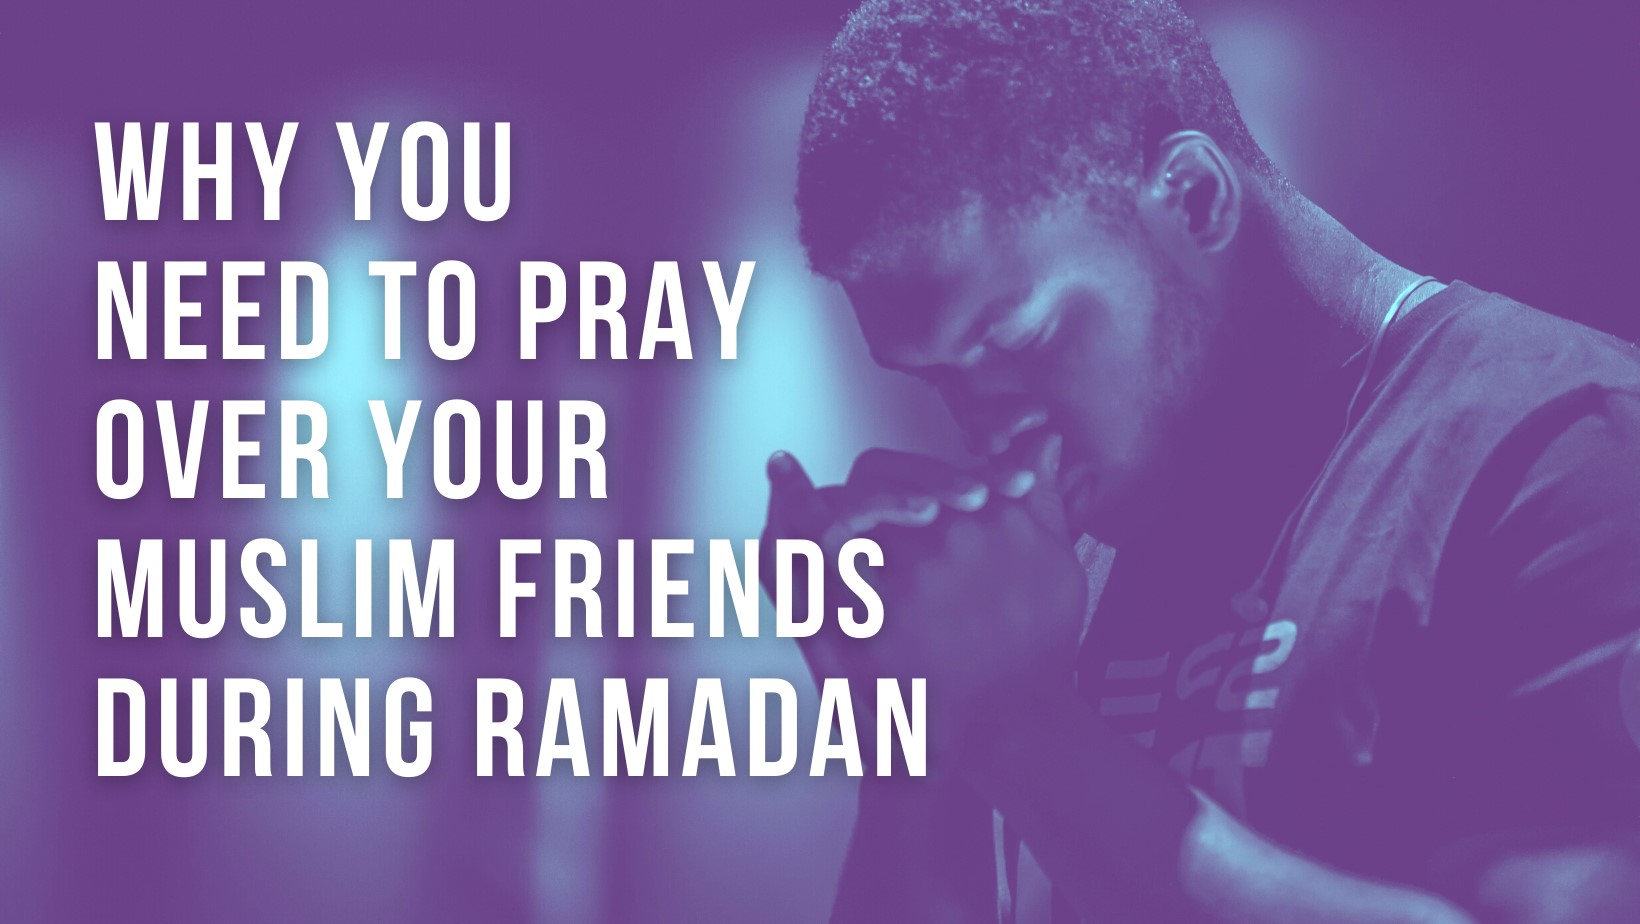 Why you need to pray over your Muslim friends during Ramadan